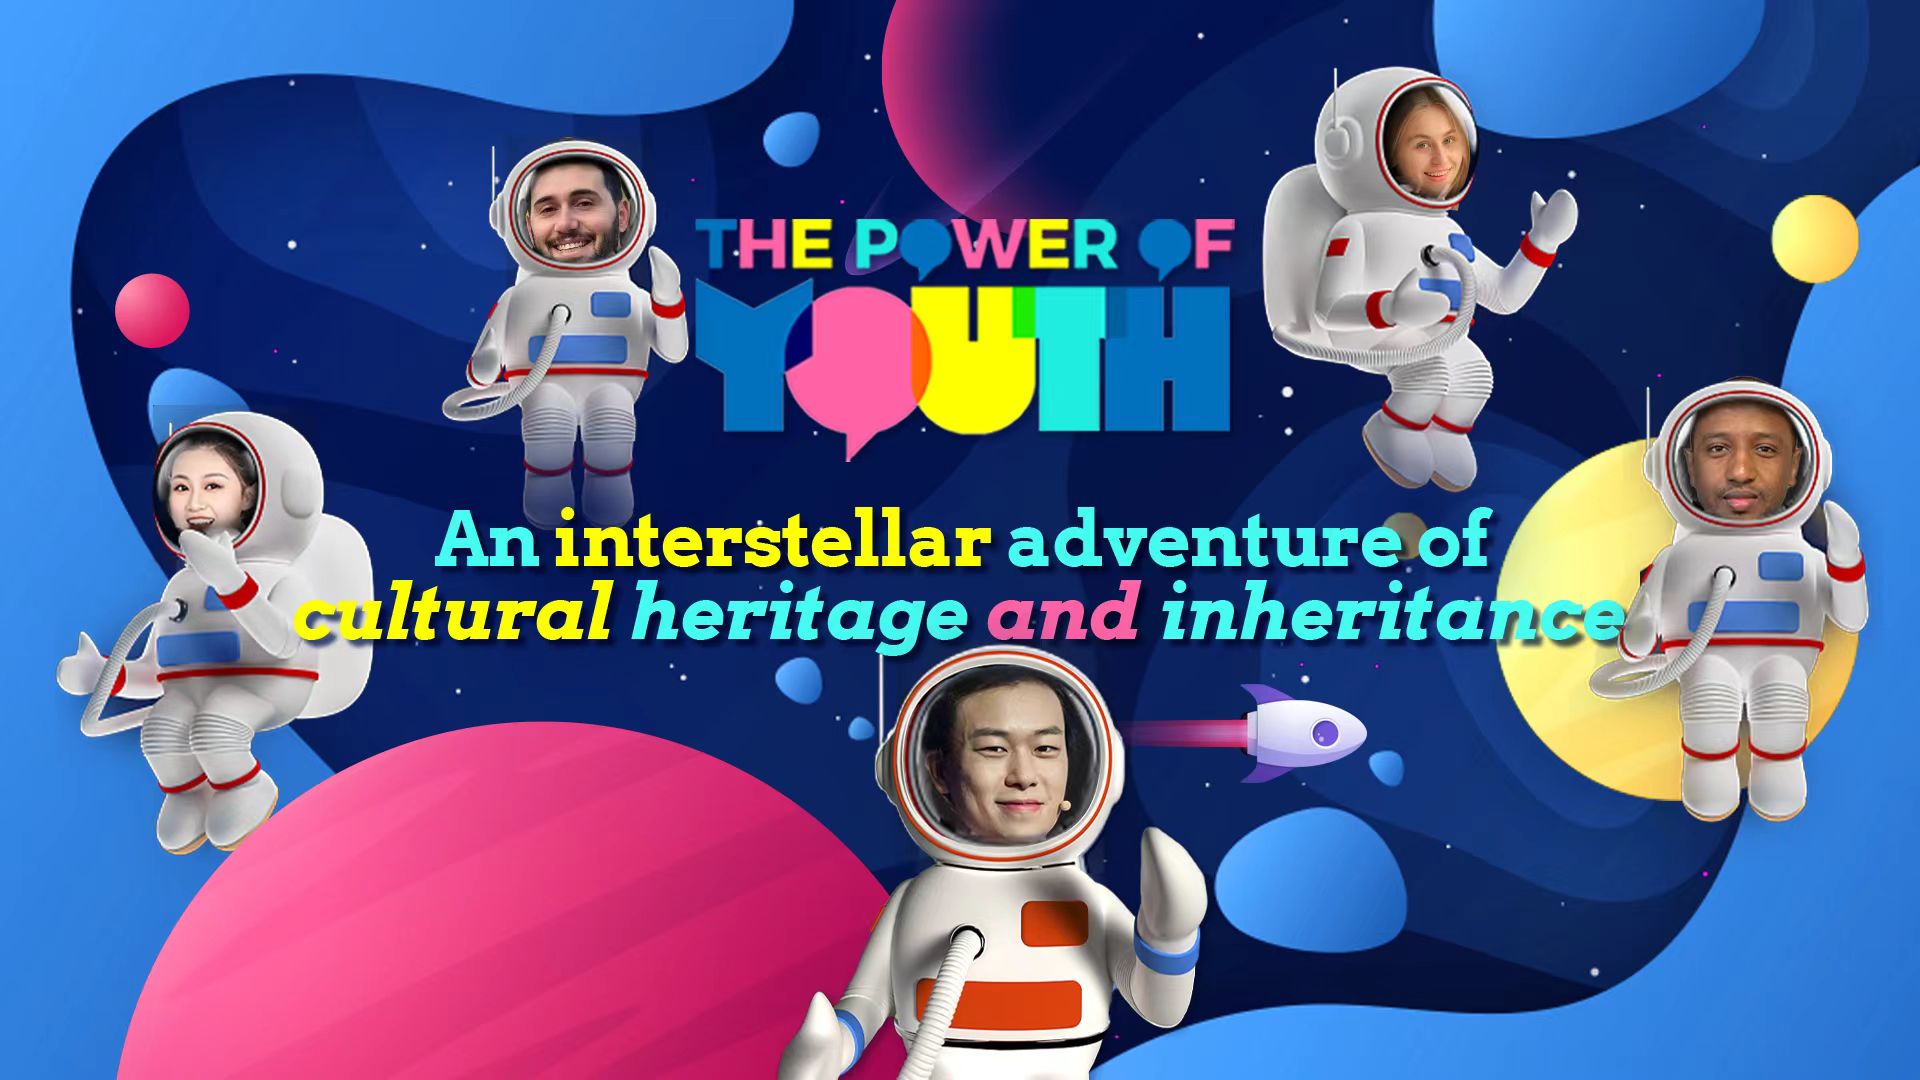 Live: 'The Power of Youth' – An interstellar adventure of cultural heritage and inheritance